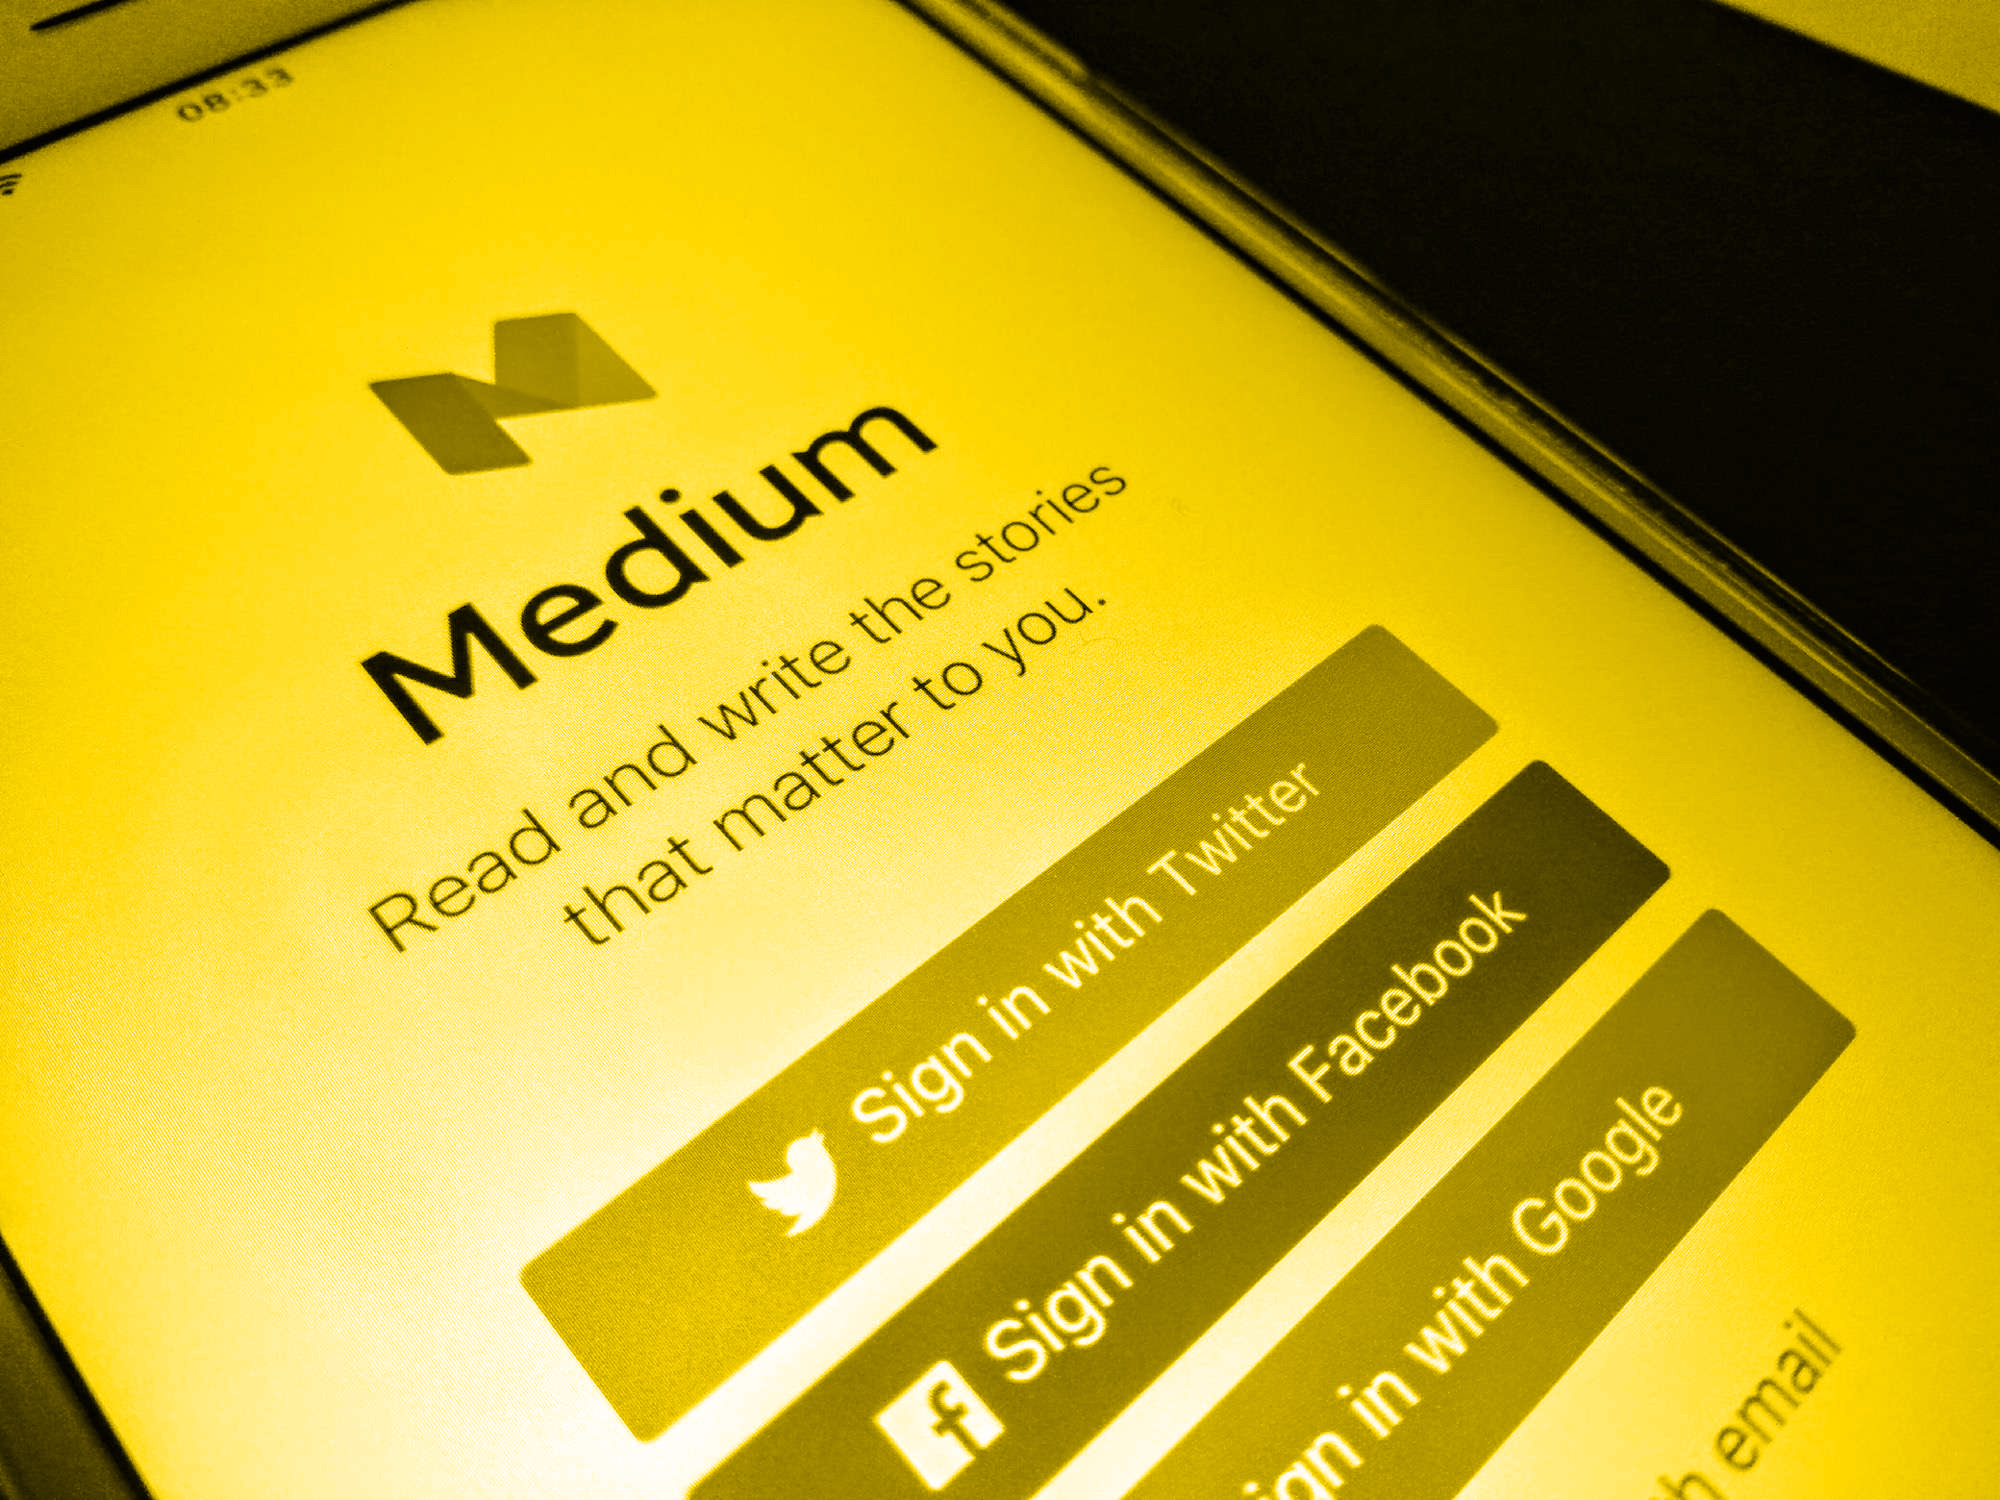 Do I have to have my steak and blog "Medium"?